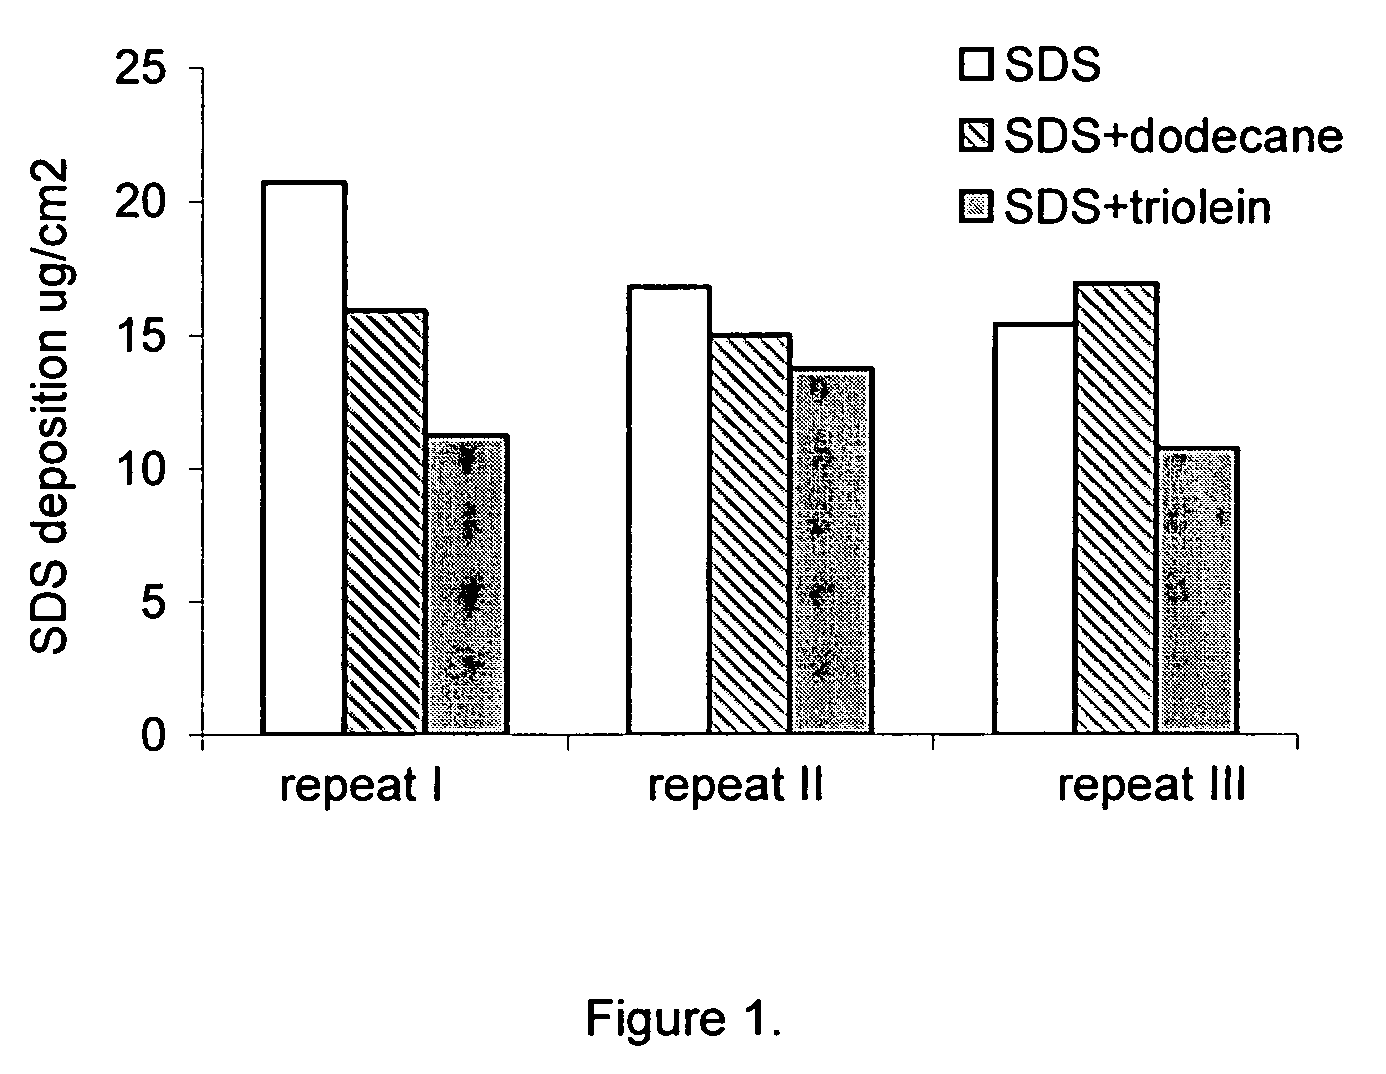 Method of selecting benefit agents/oils suitable for reducing surfactant damage